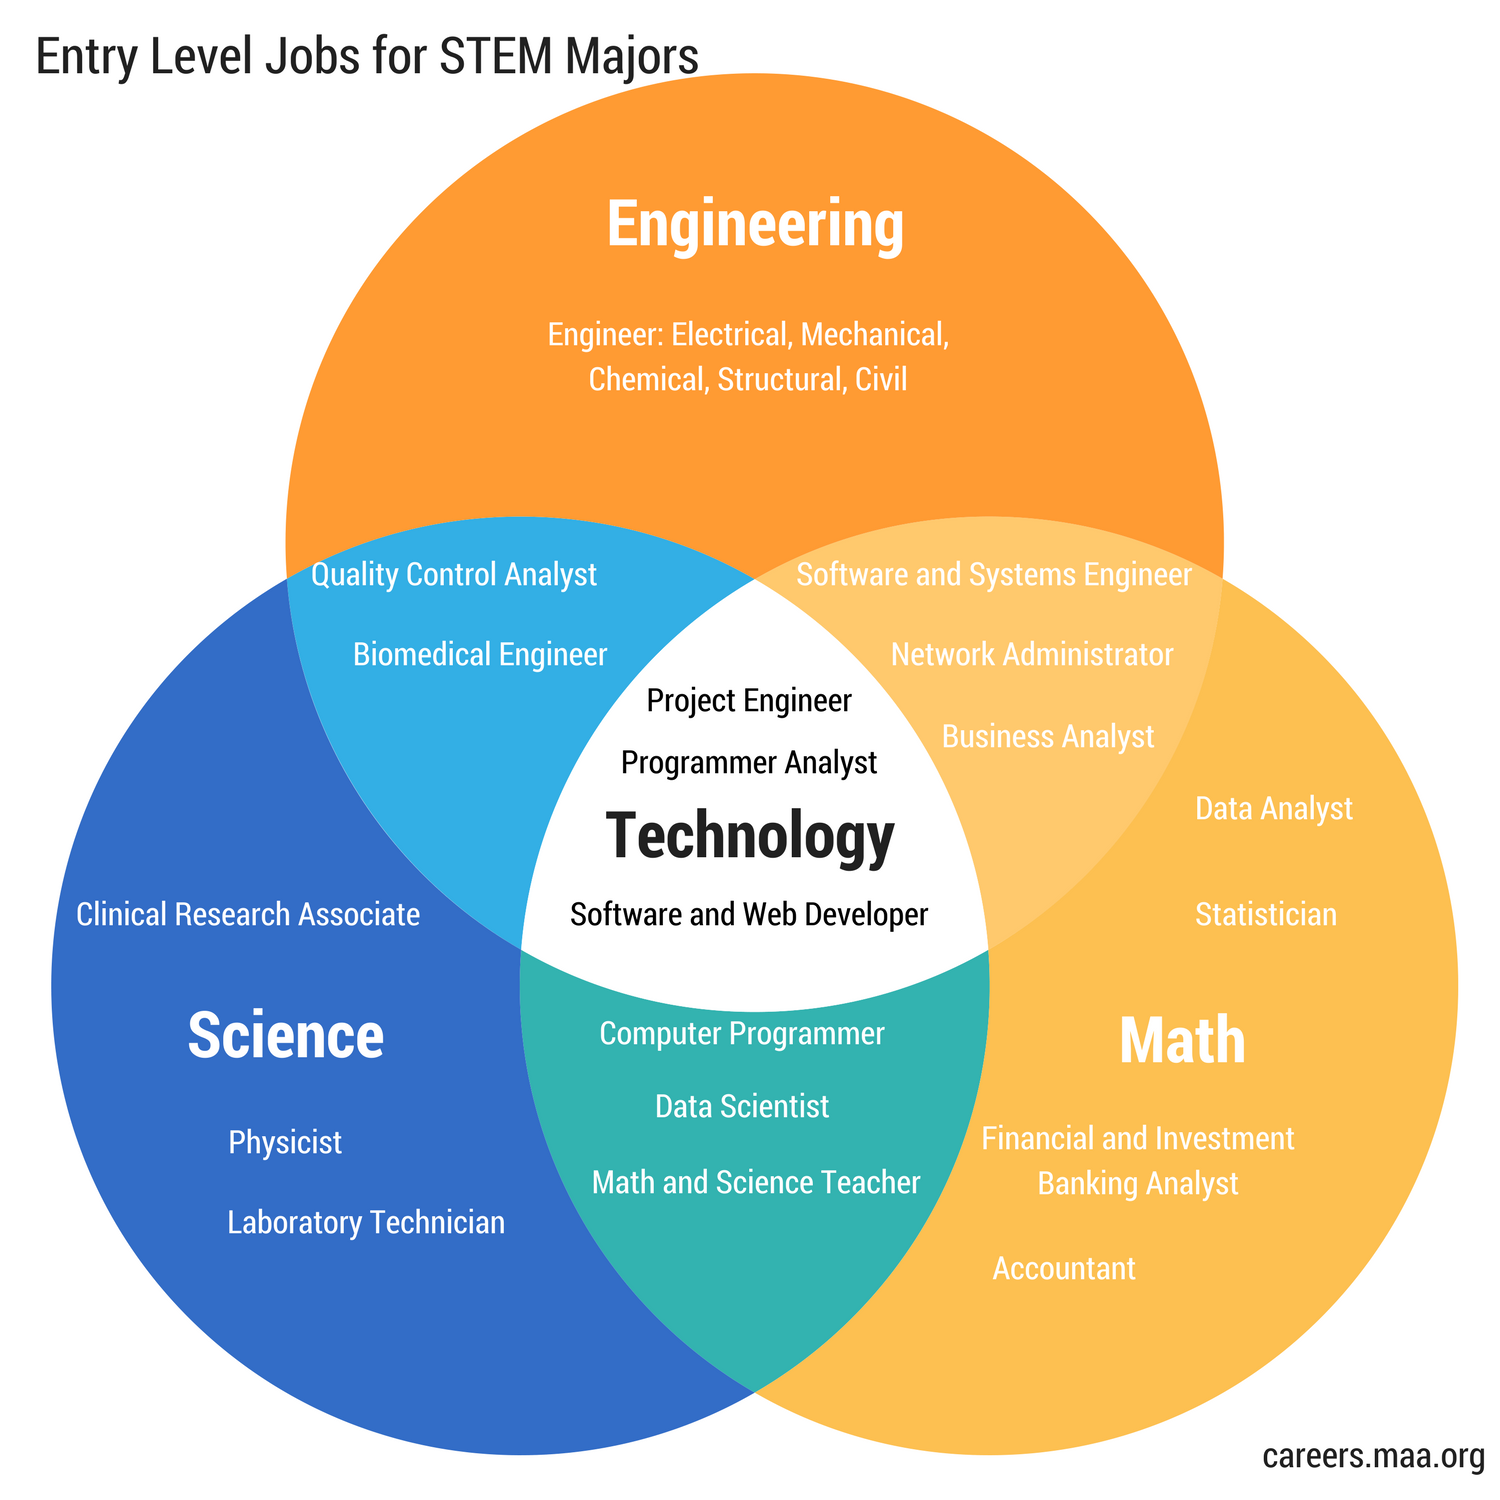 math-careers-department-of-mathematics-and-applied-mathematical-sciences